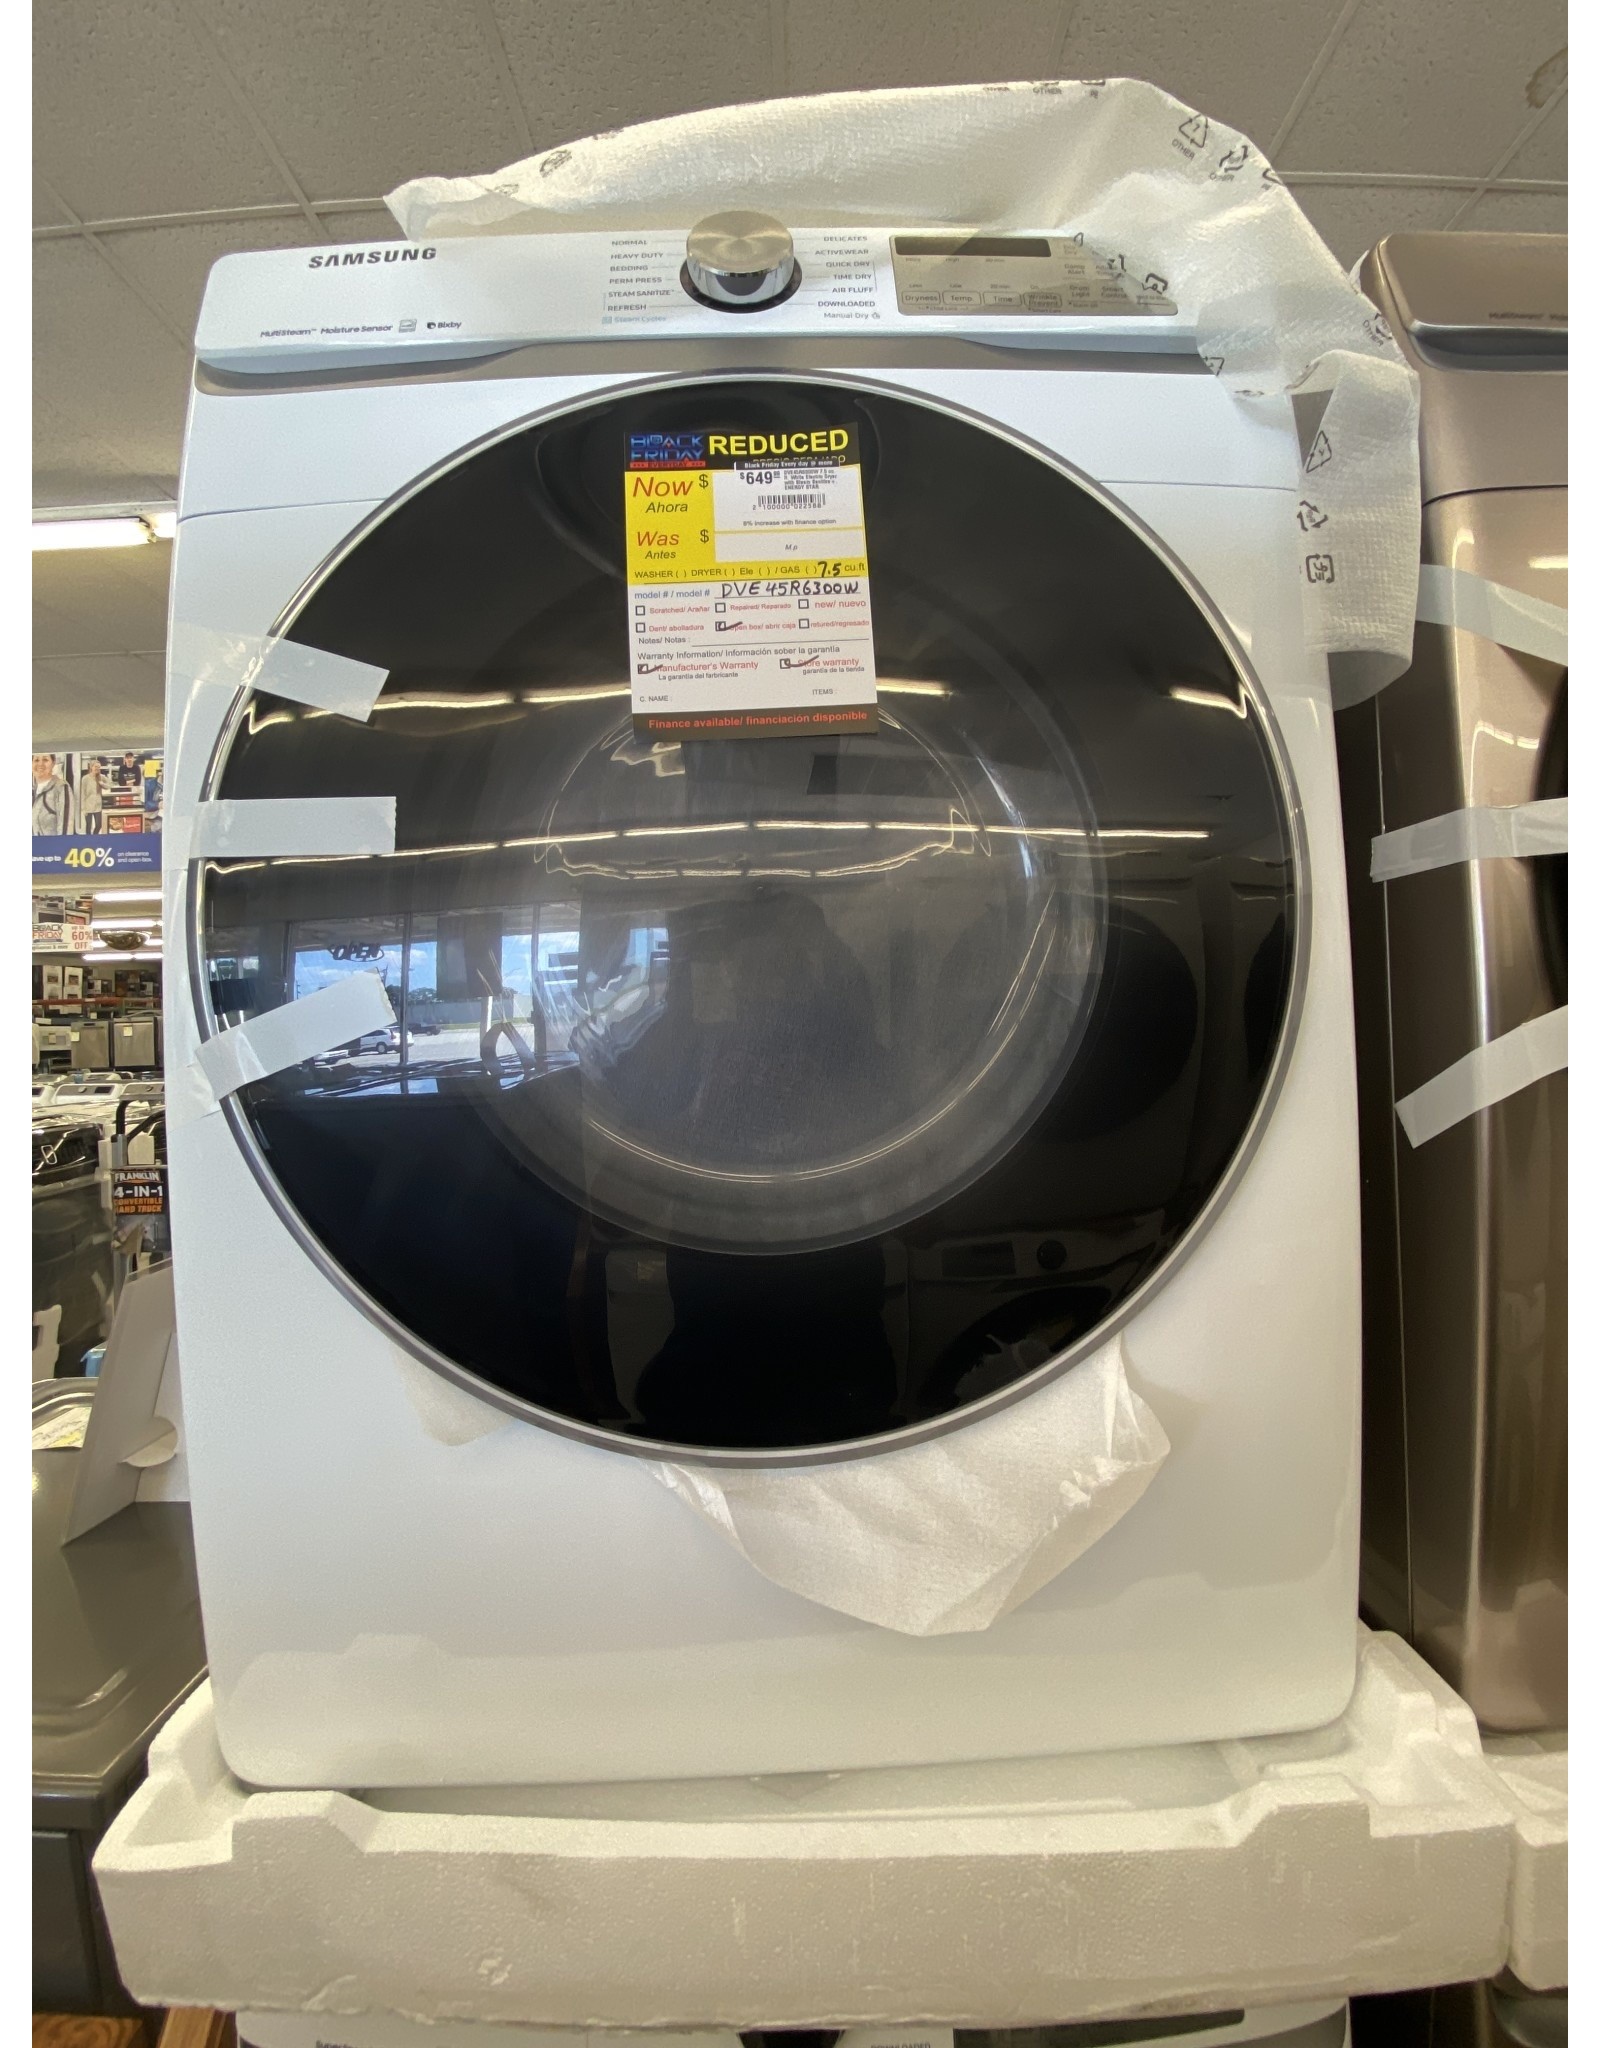 SAMSUNG DVE45R6300W 7.5 cu. ft. White Electric Dryer with Steam Sanitize+, ENERGY STAR